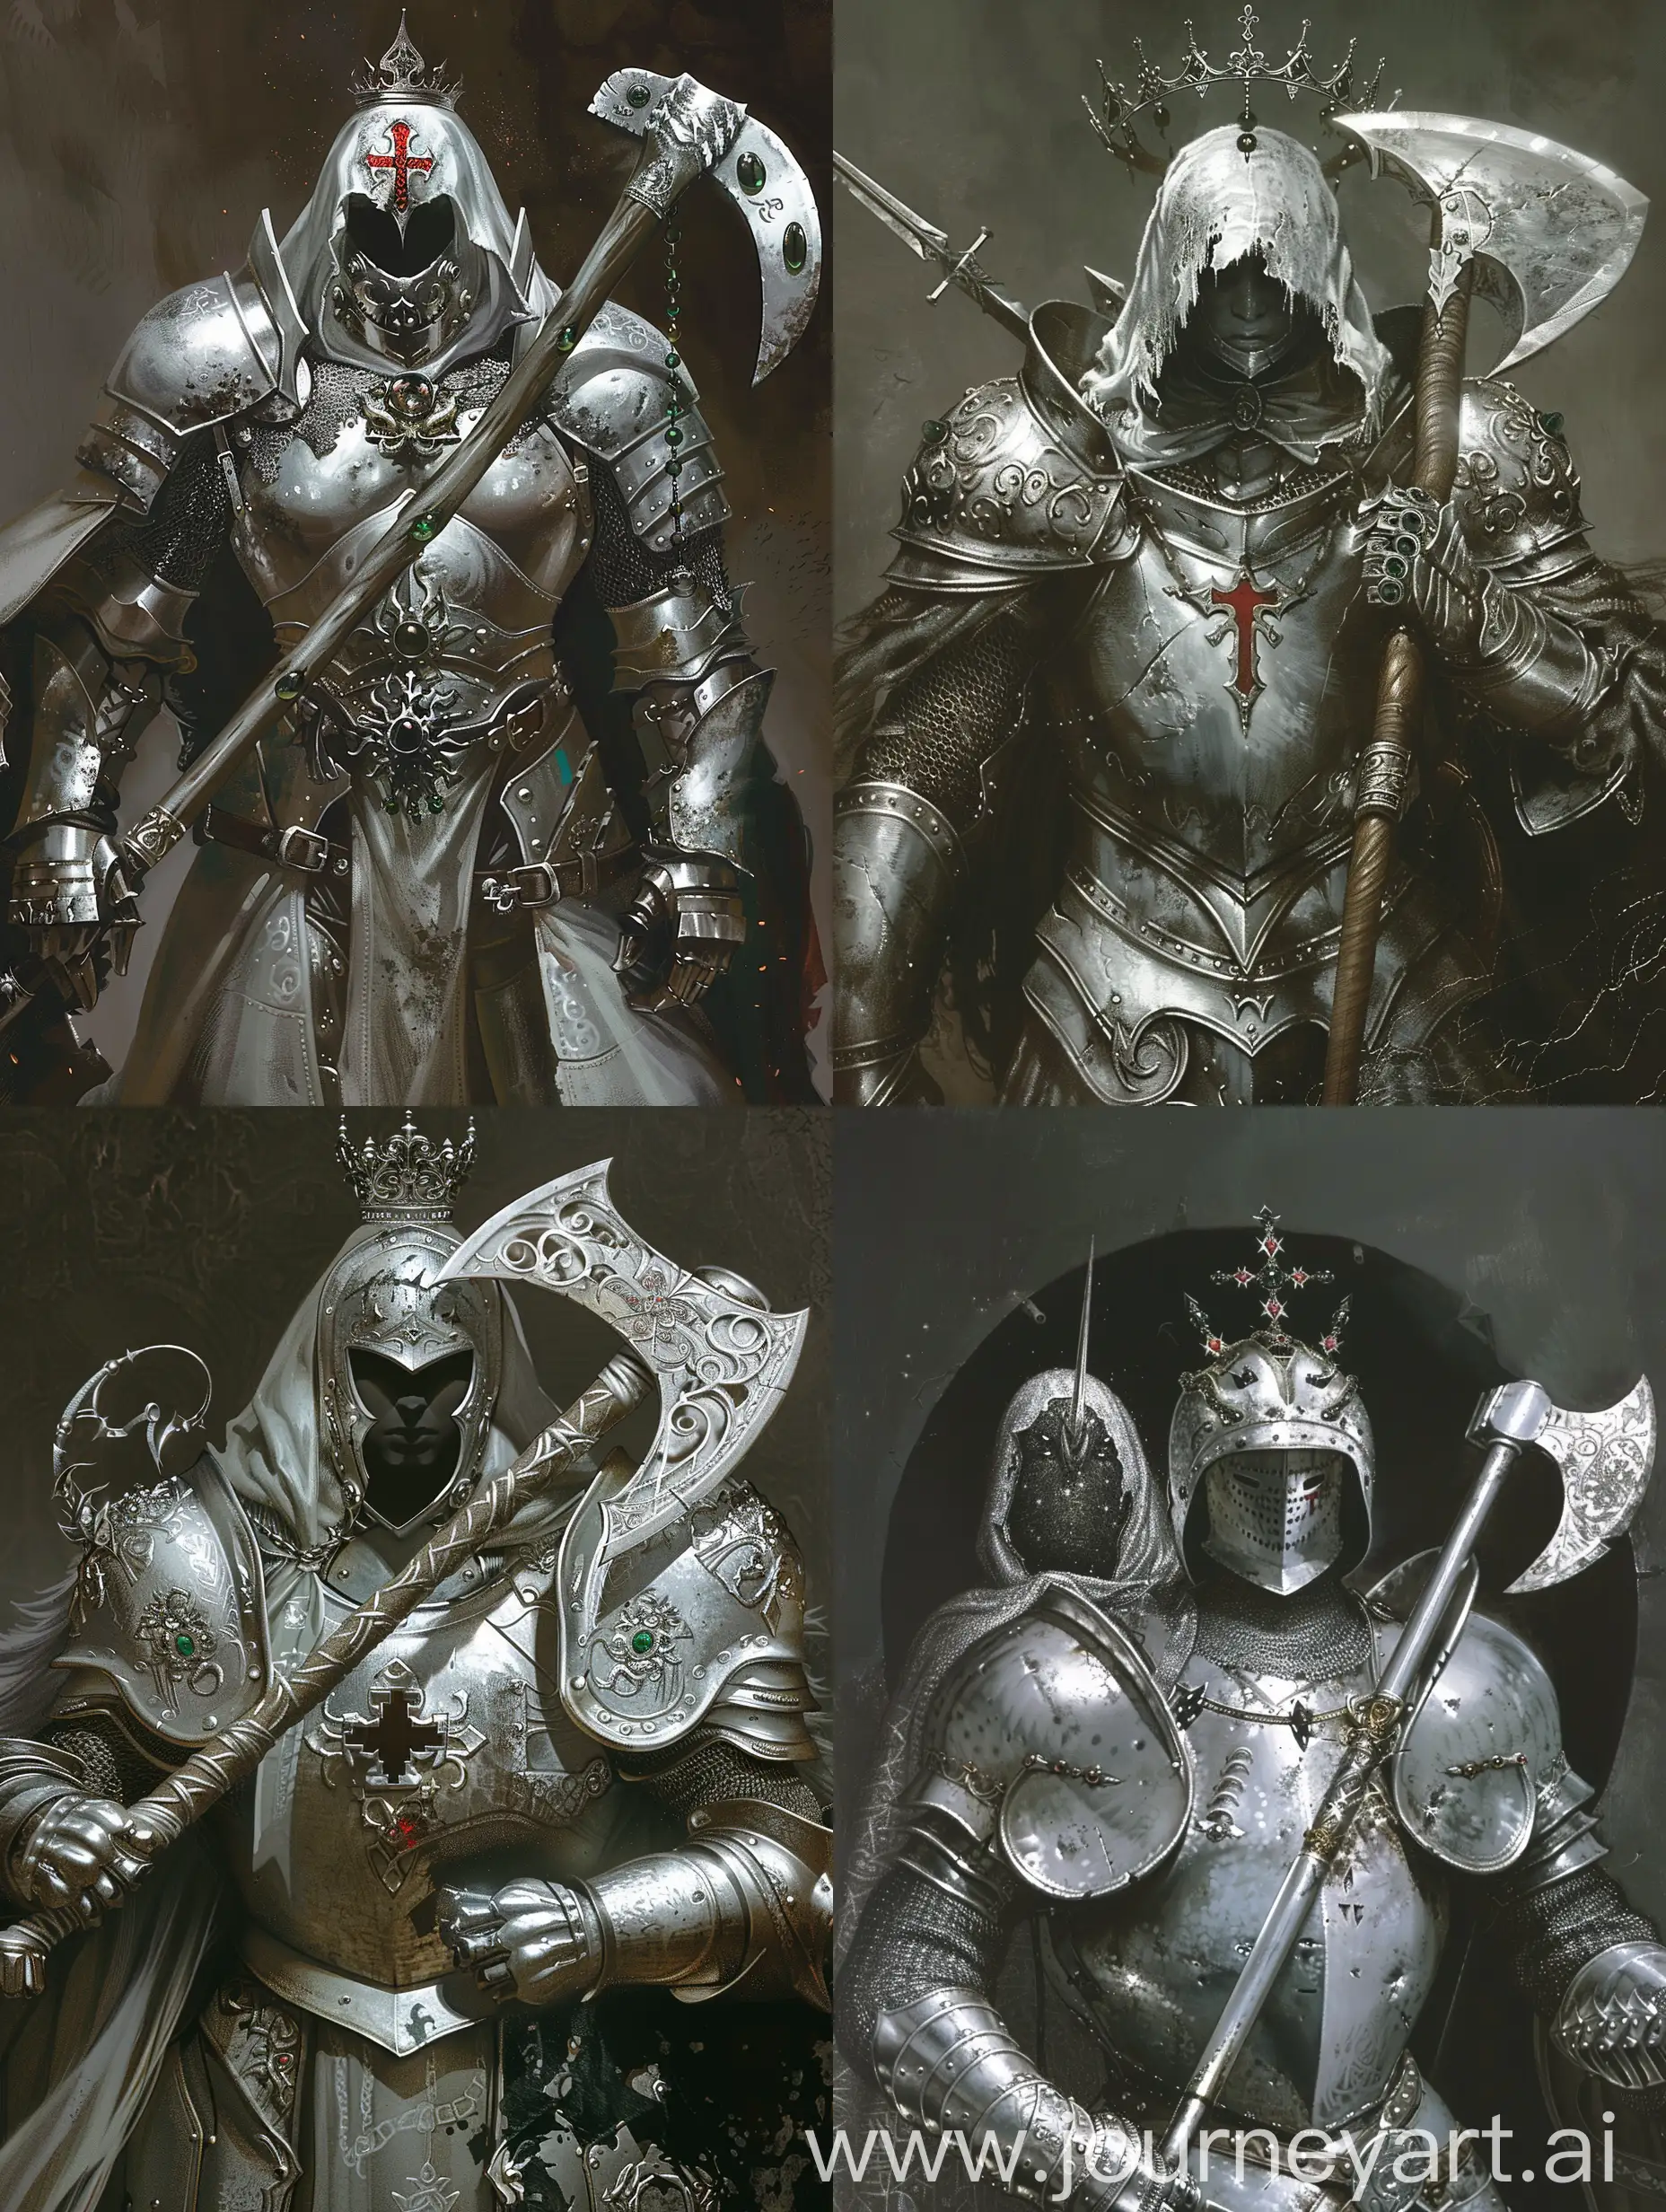 Silver-Armored-Knight-with-Illuminated-Creature-and-Crowned-Hood-in-Dark-Fantasy-Setting